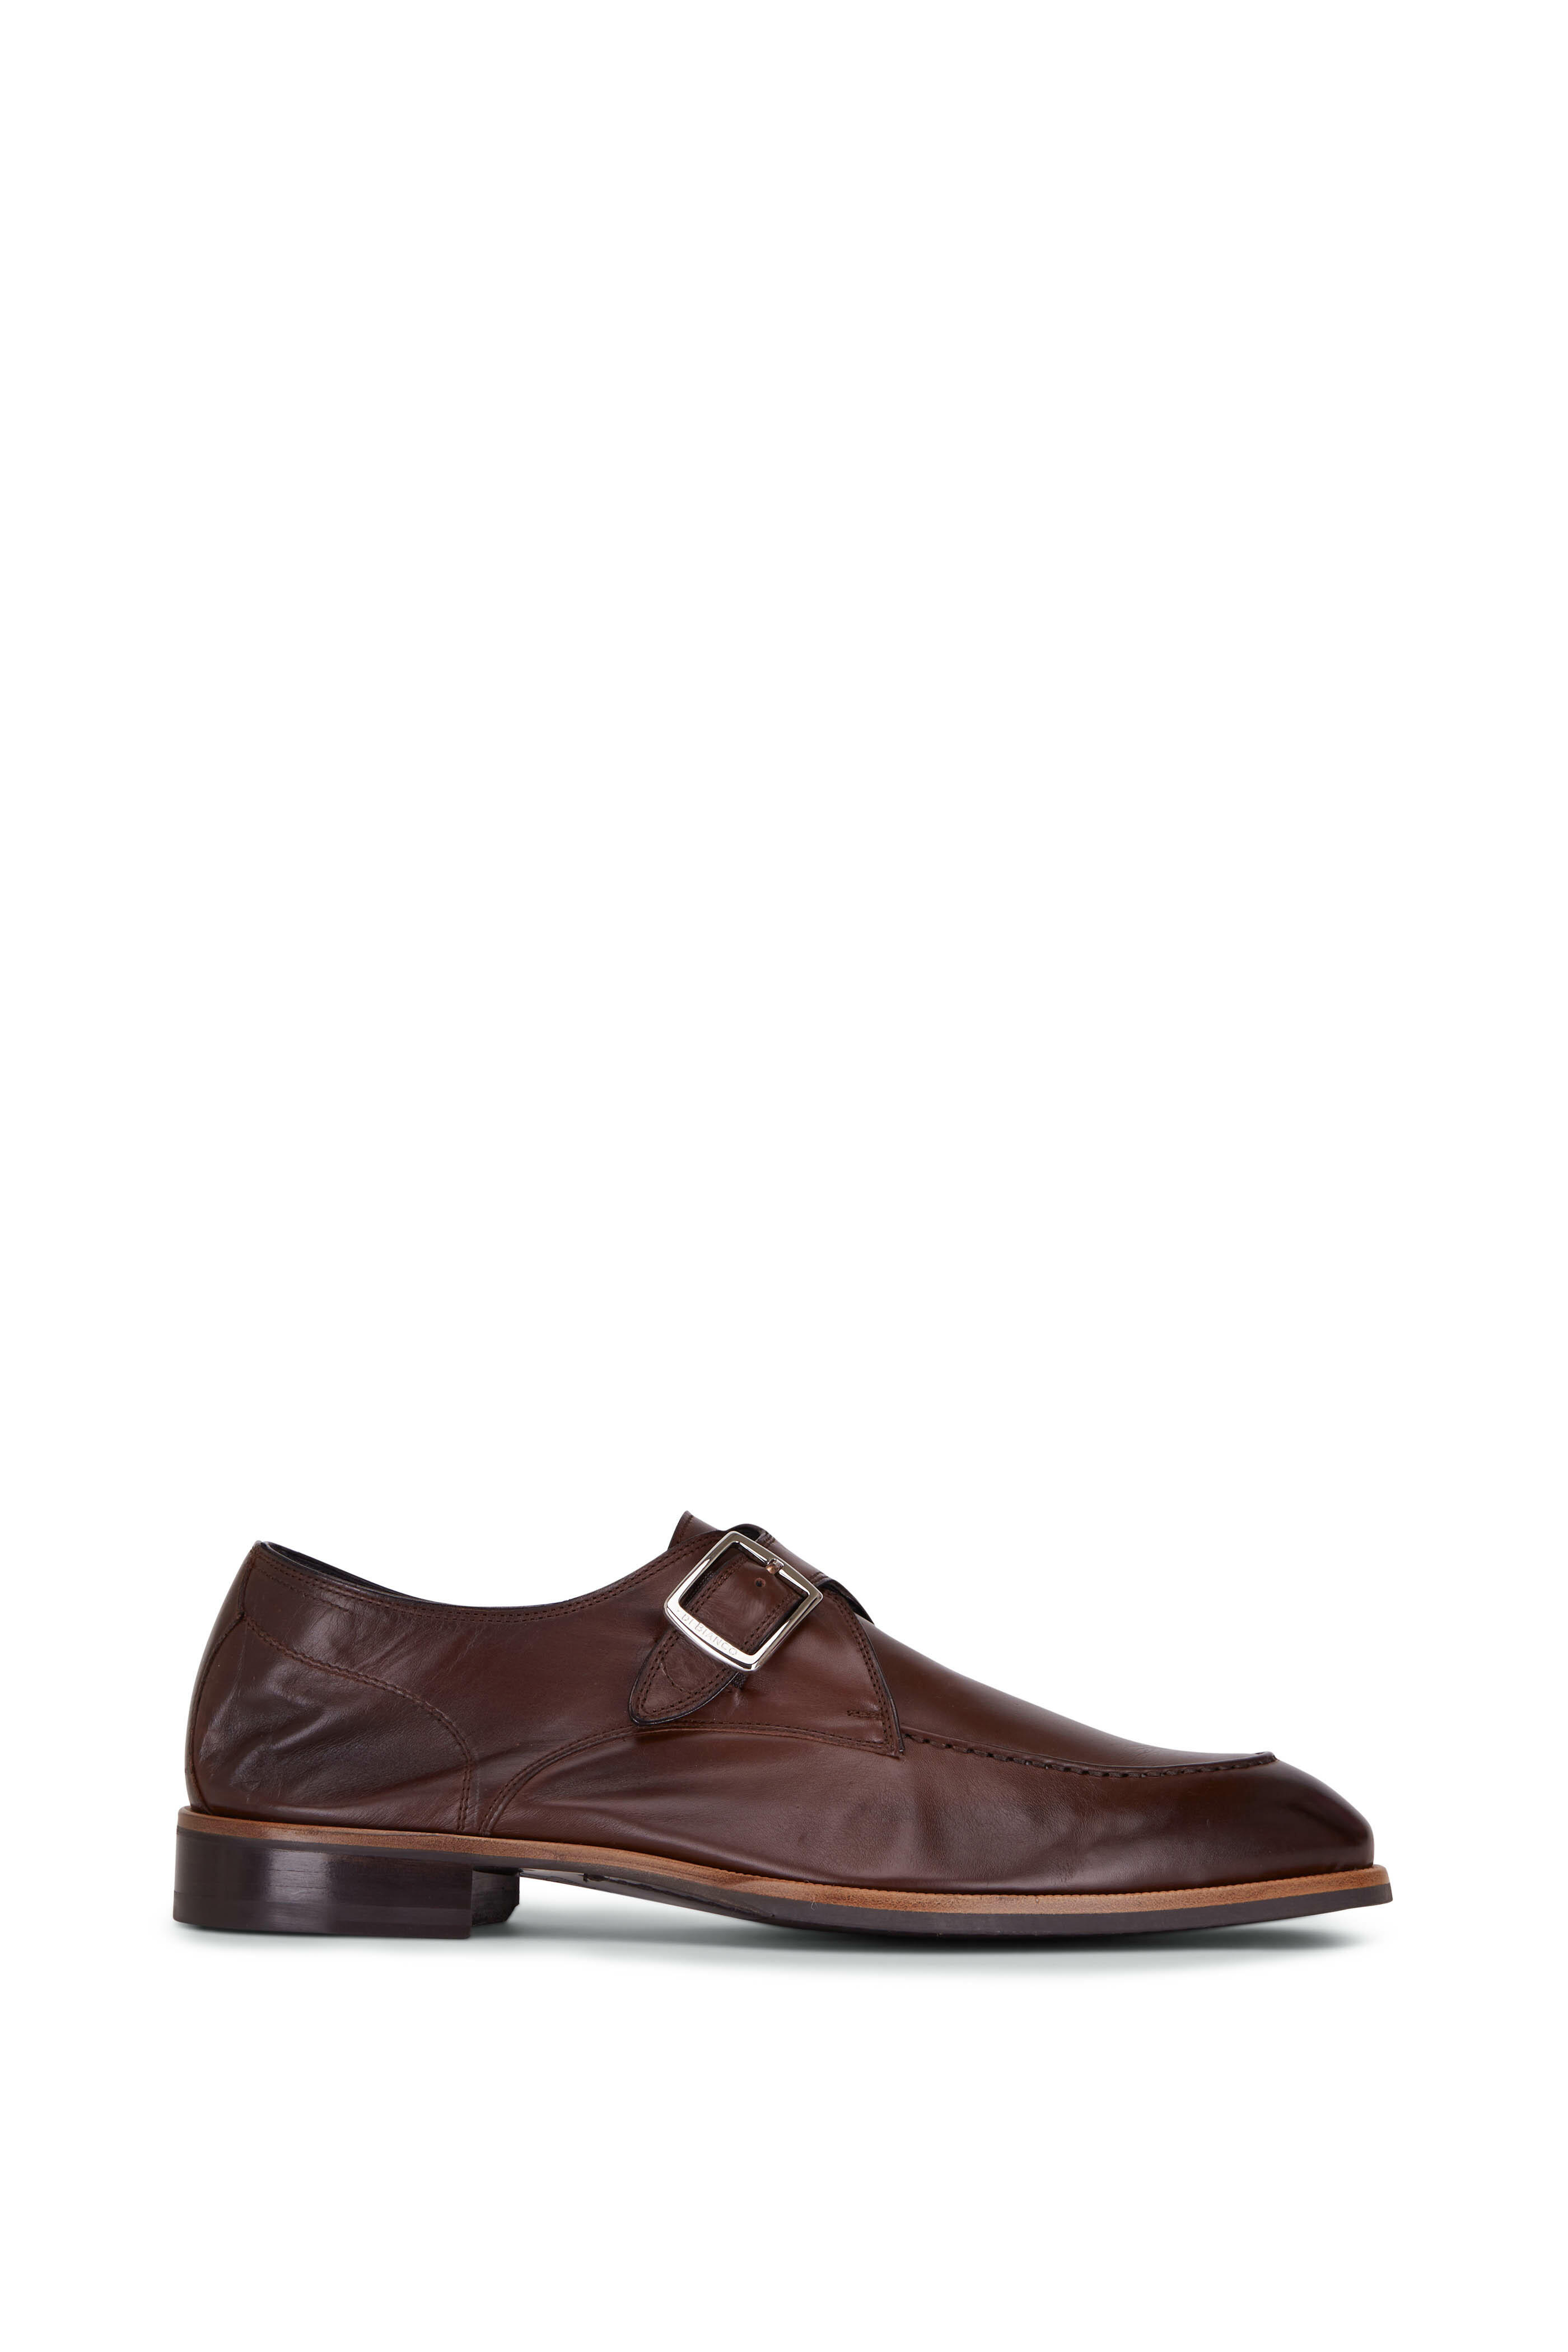 Di Bianco - Parma Brown Leather Strap | Mitchell Stores